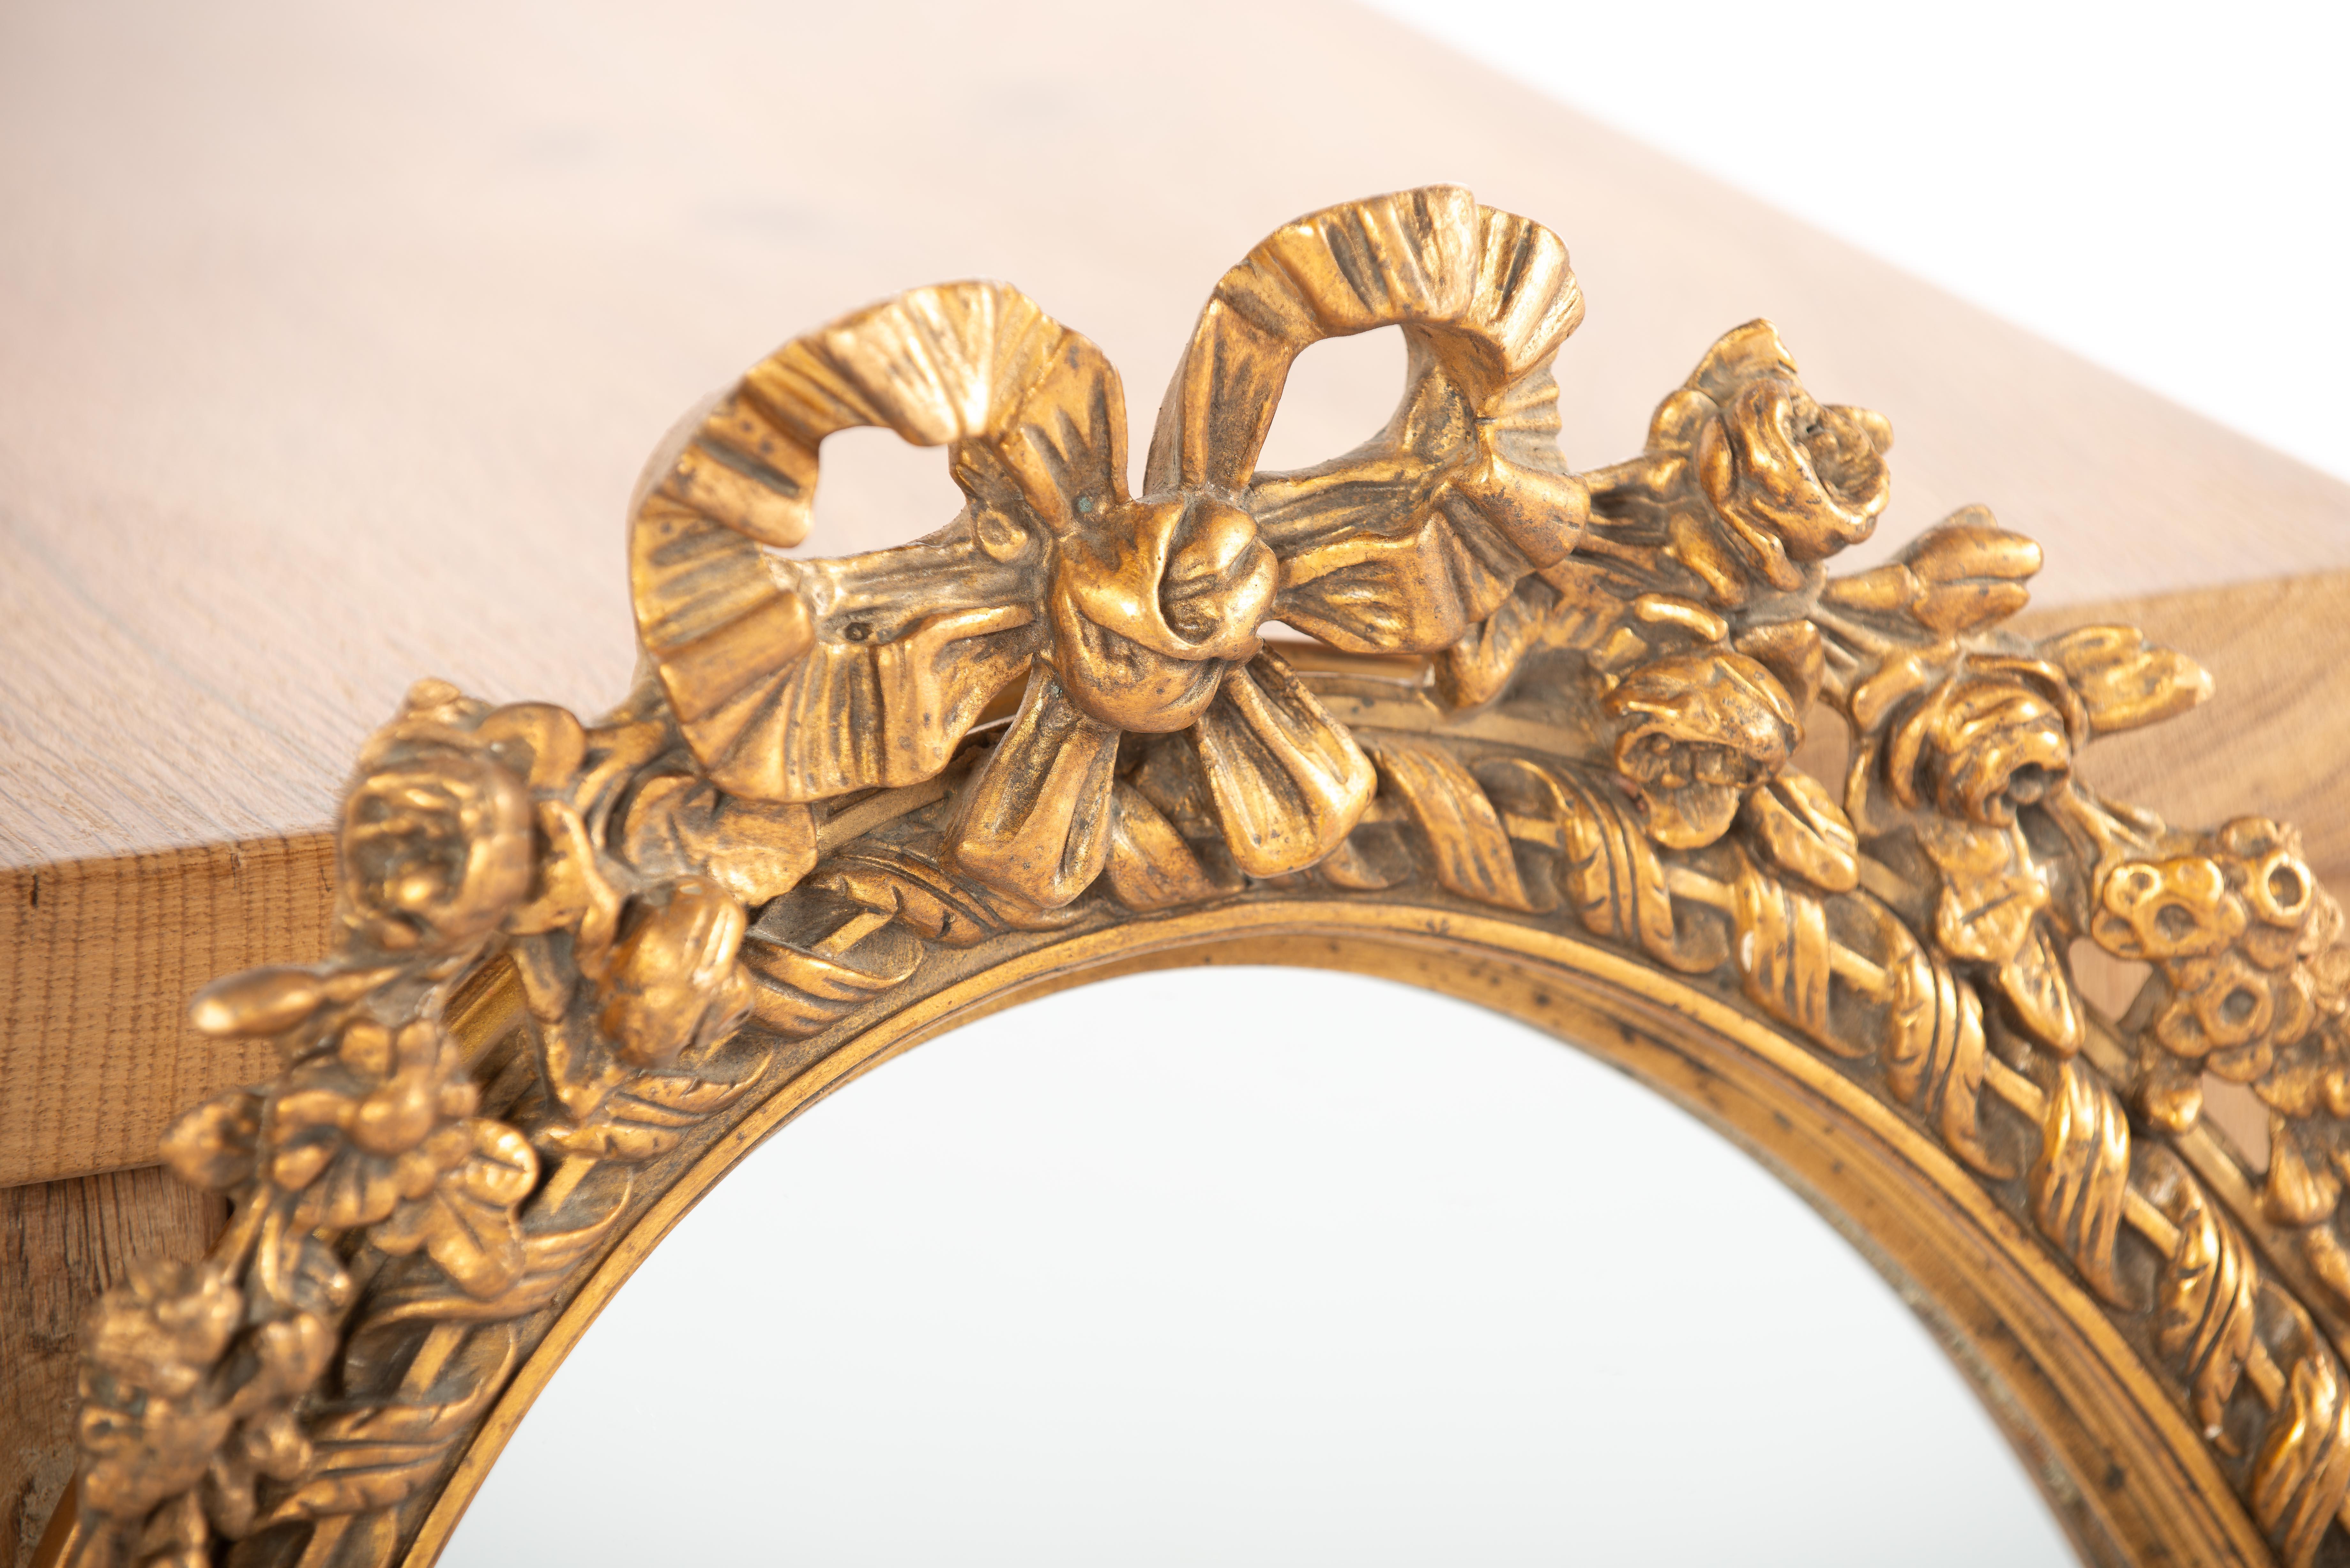 This is a beautiful small oval mirror that was crafted in France in the early 20th century, around 1910. The mirror features a frame made of lime wood and is adorned with plaster molding and ornaments. The top ornament consists of a tied ribbon